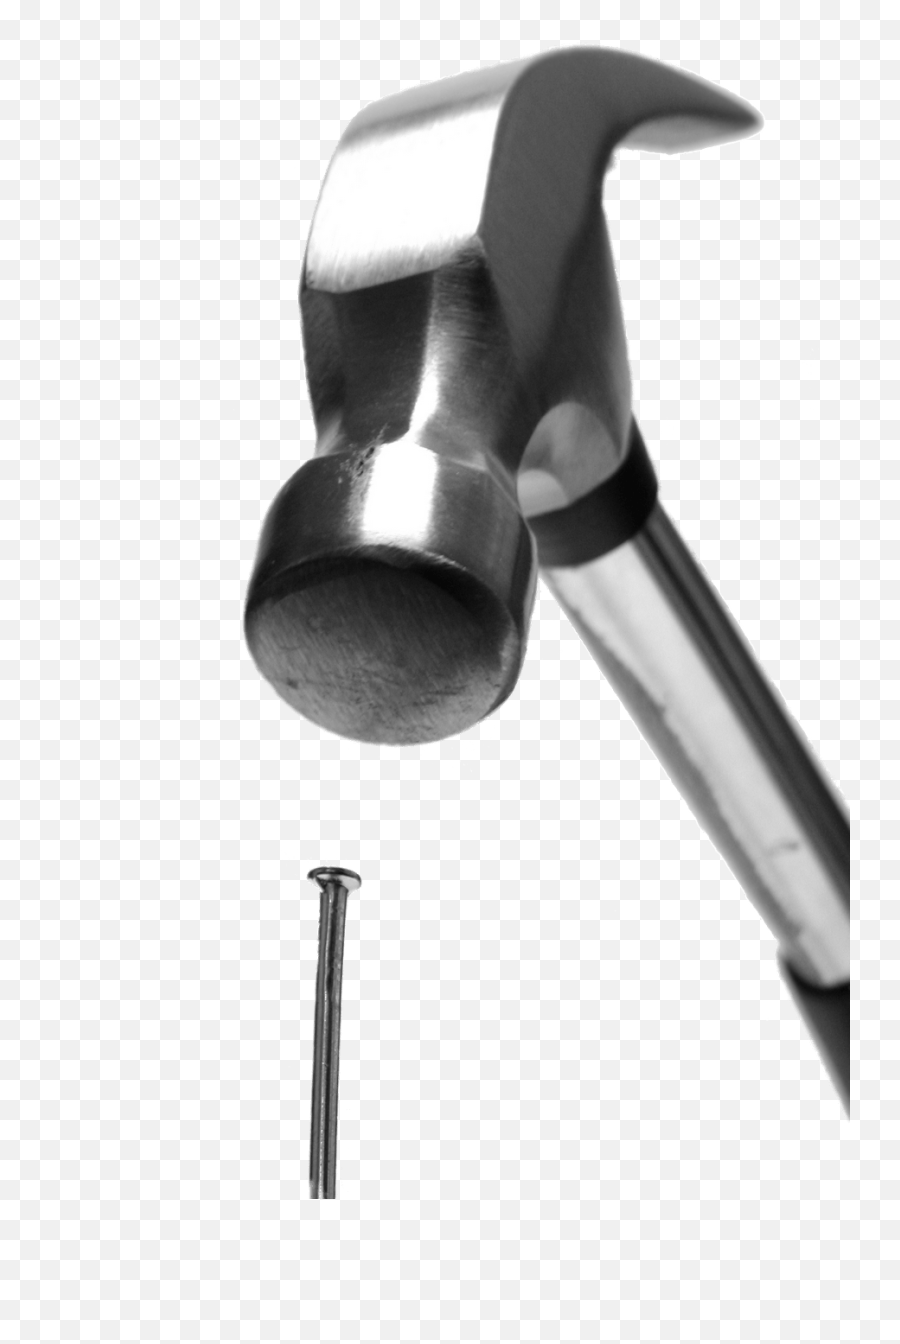 Hammer Hitting Nail Transparent Png - You Have A Hammer Everything Looks Like A N,Nail Transparent Background